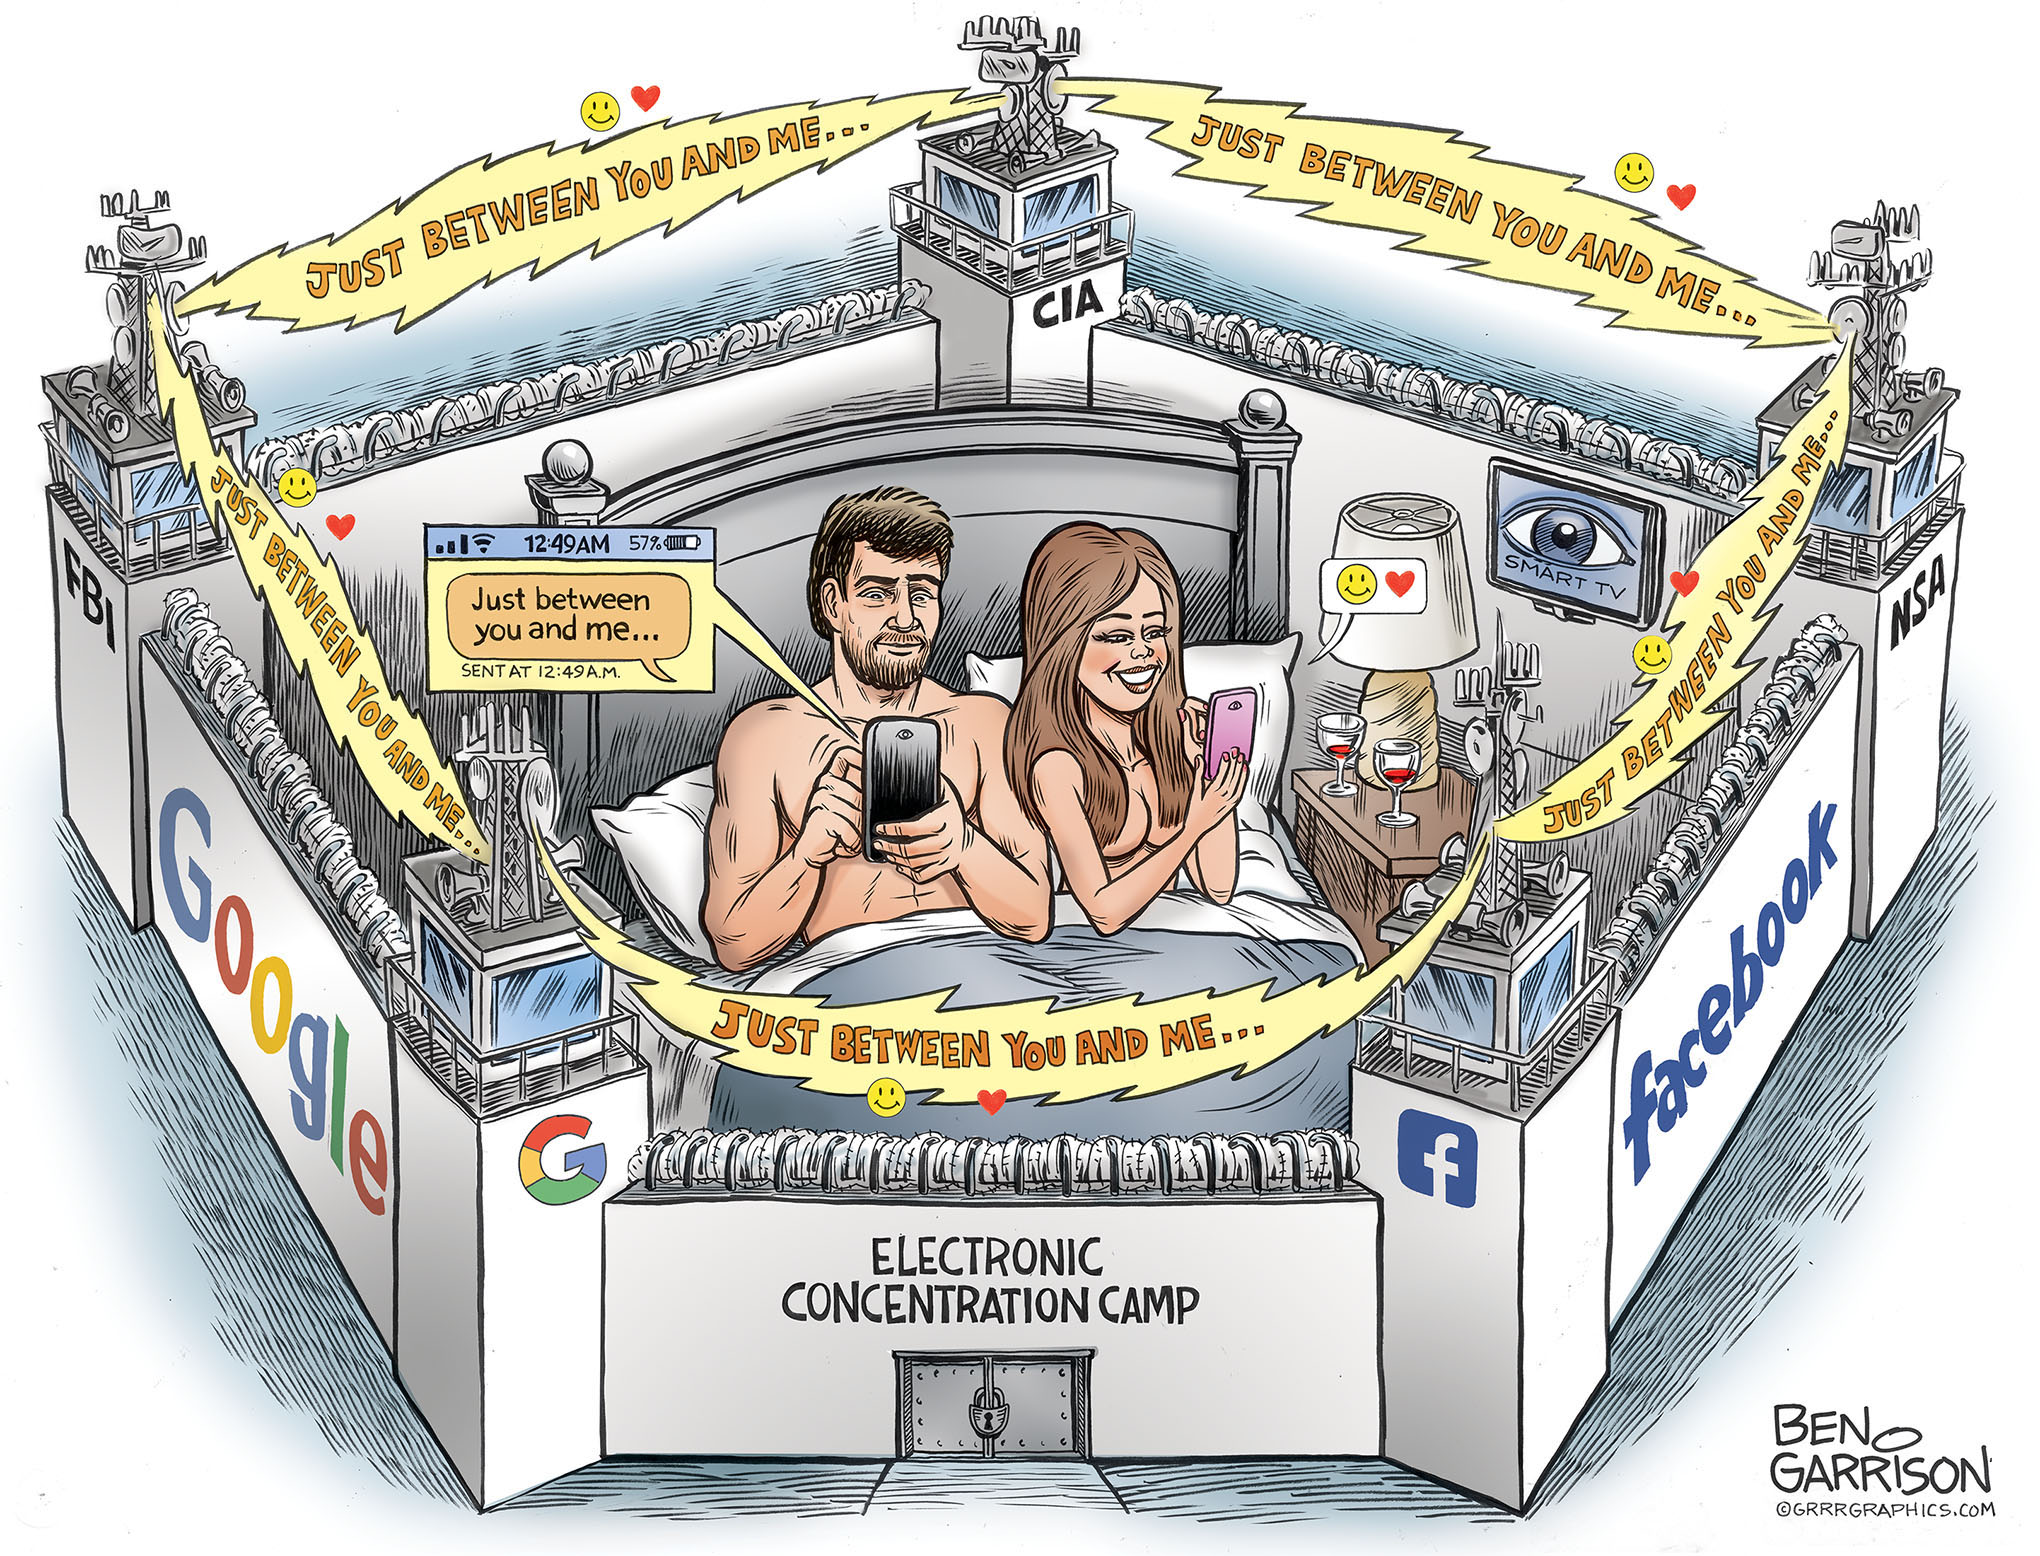 Electronic Concentration Camp cartoon by Ben Garrison